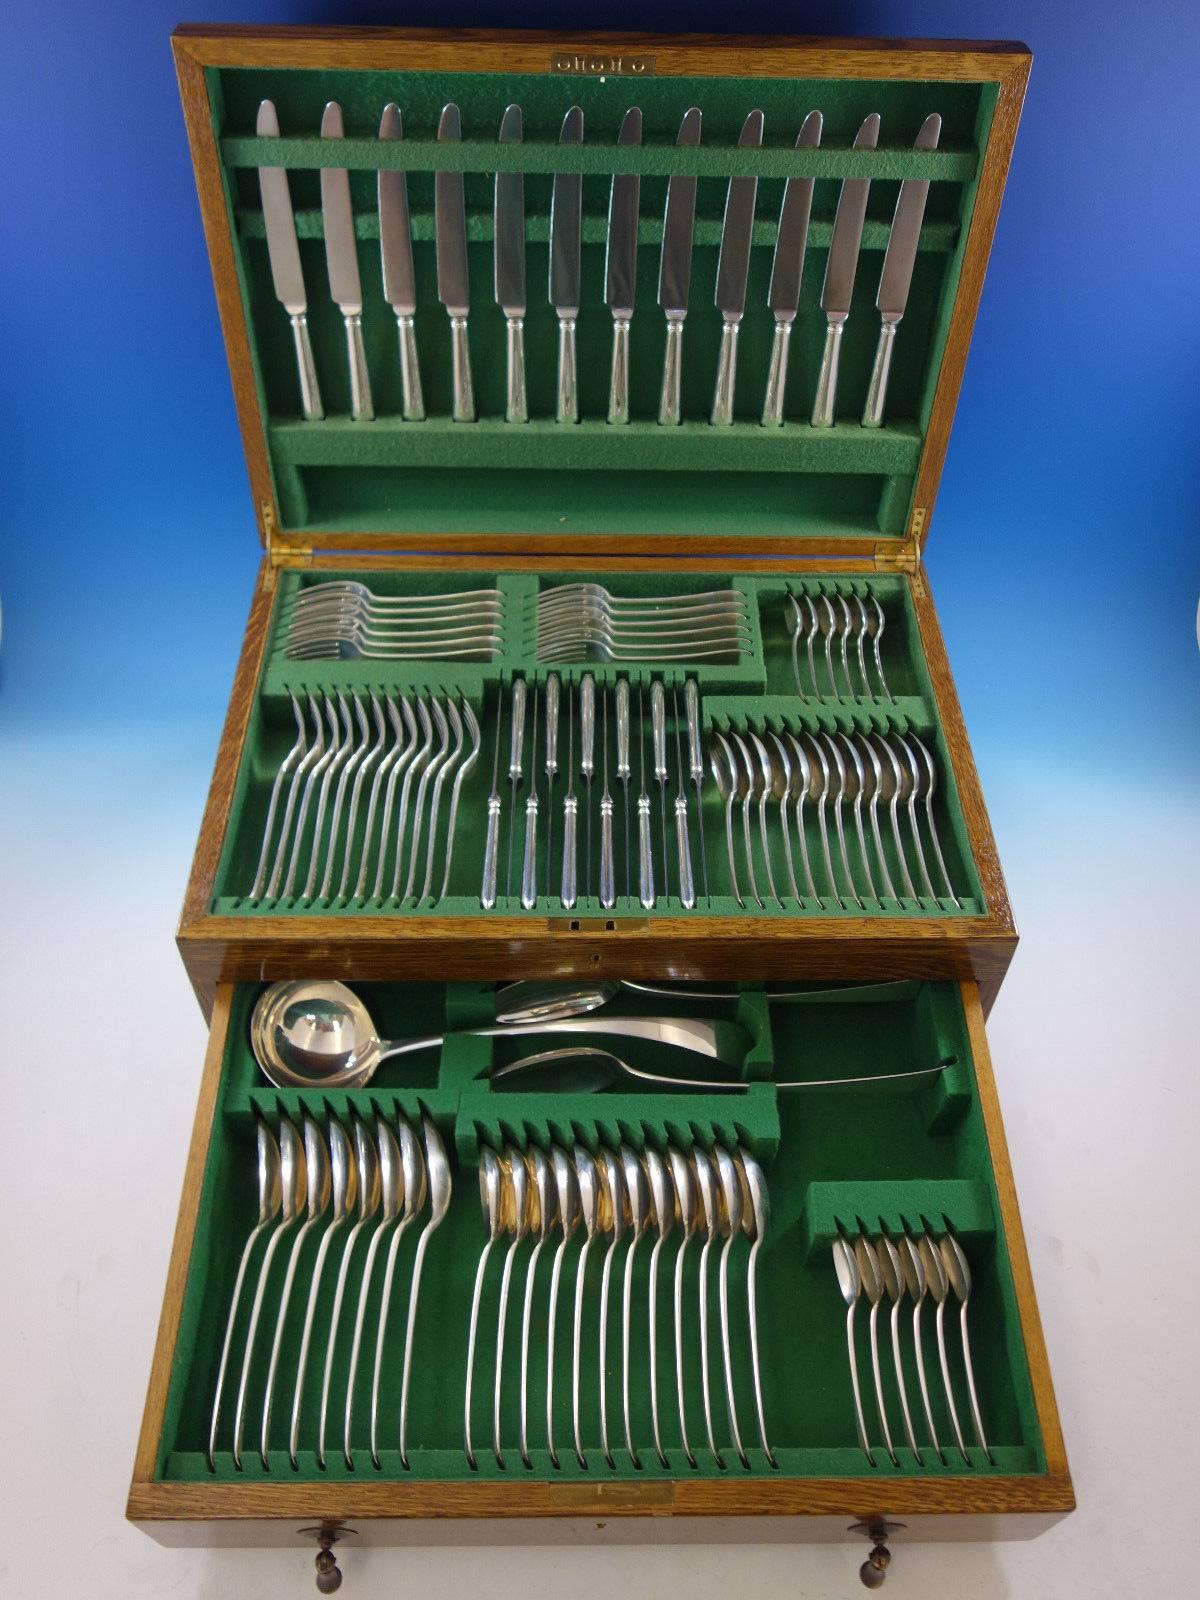 Dinner and luncheon size Old English by Richard Burbridge (Harrods Ltd.) circa 1917 London sterling silver flatware set, 95 pieces in fitted box. This set includes: 12 dinner size knives, 9 1/2